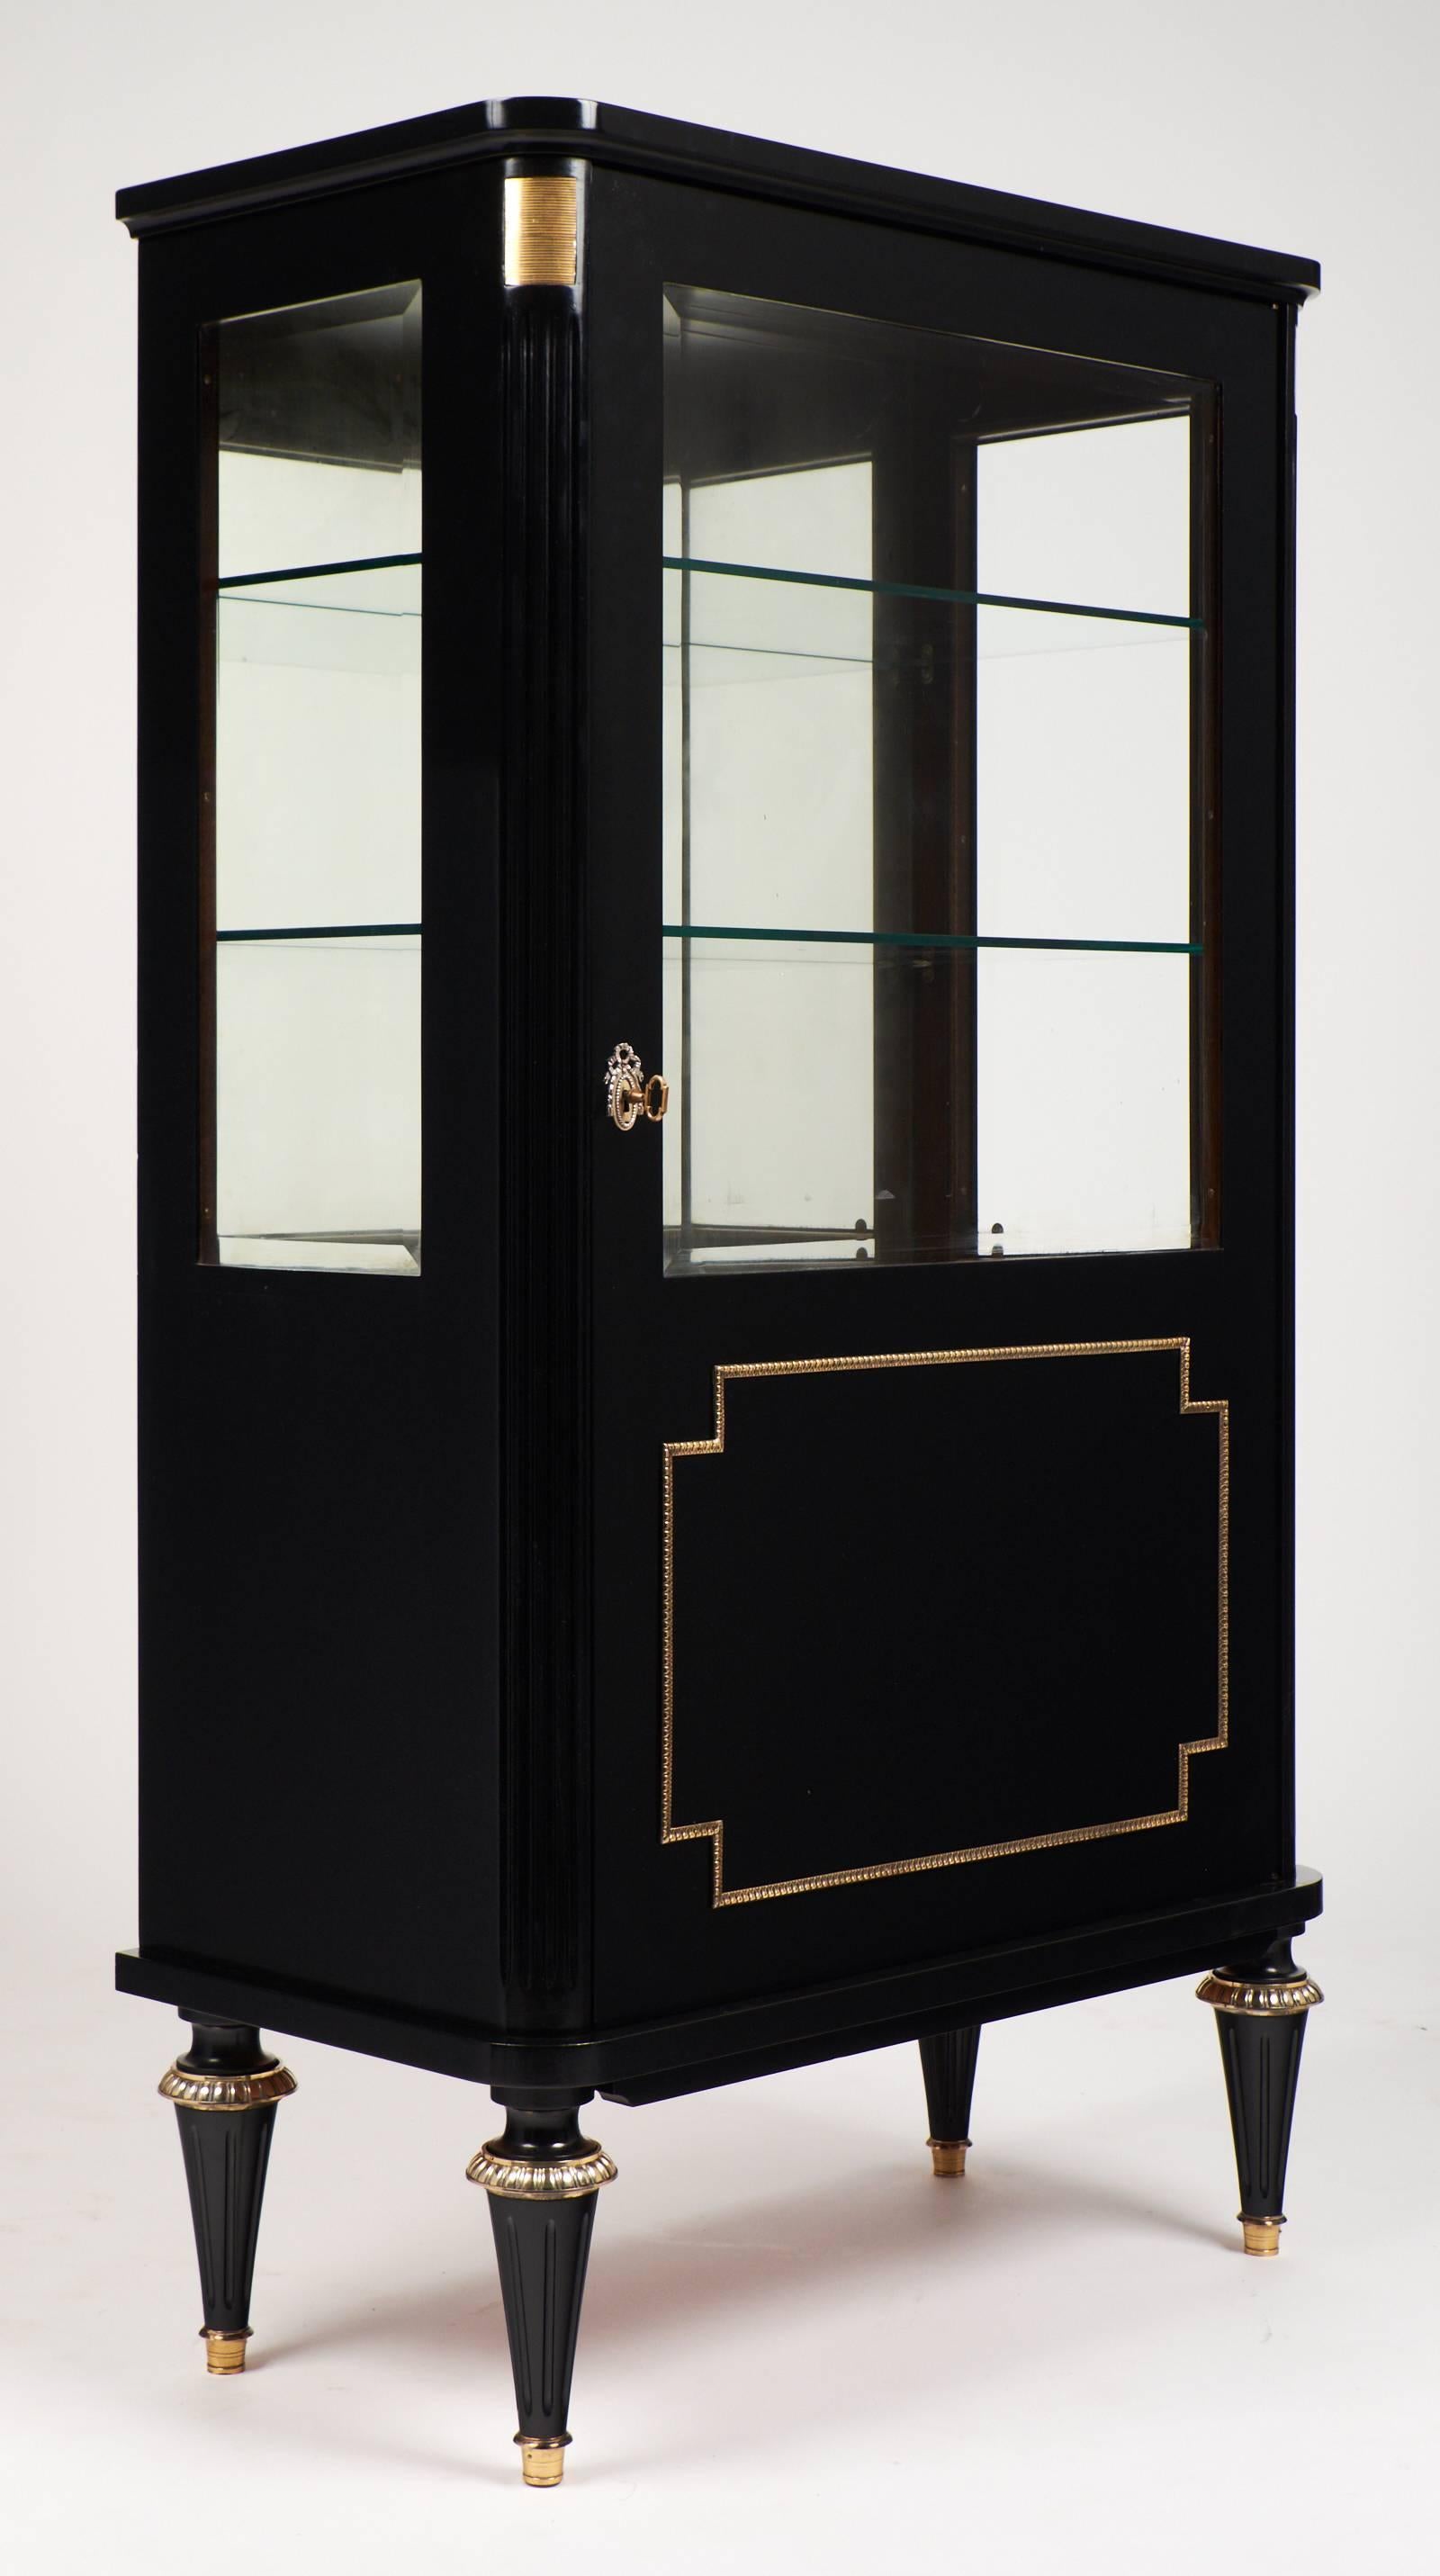 French mahogany bookcase in the manner of Maison Jansen, circa 1940. Beveled glass doors and sides, mirrored back with gilt brass details, capped feet, and trim.